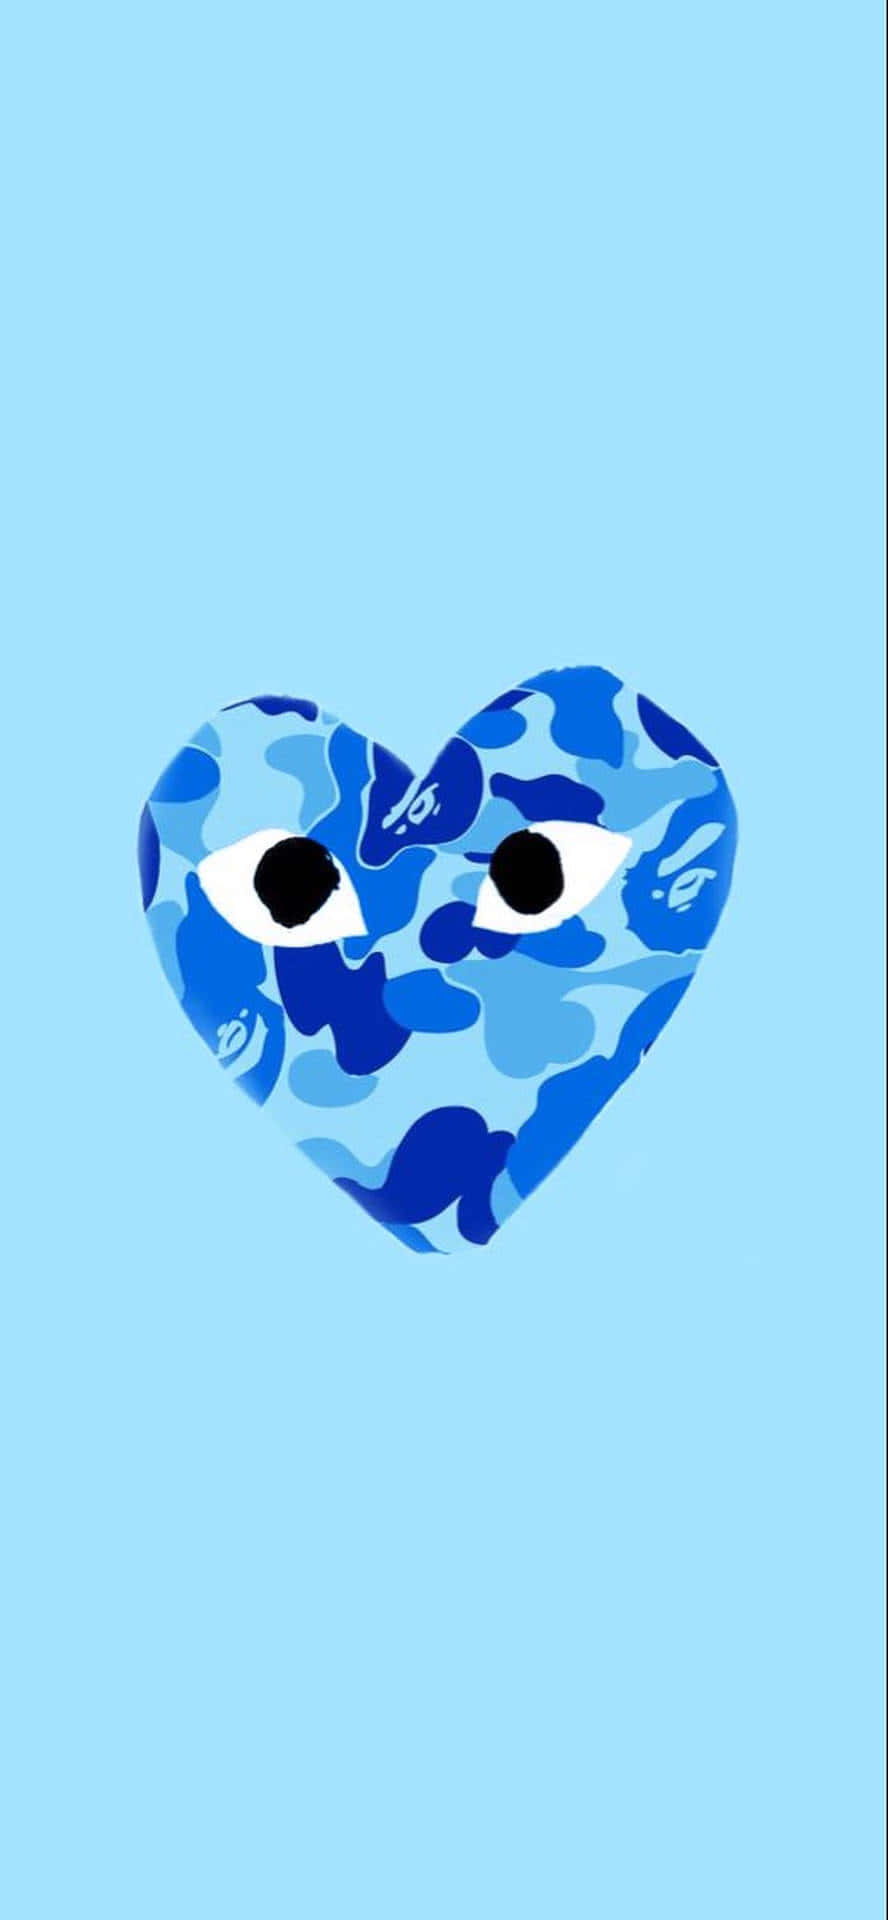 A Blue Camouflage Heart With Eyes On It